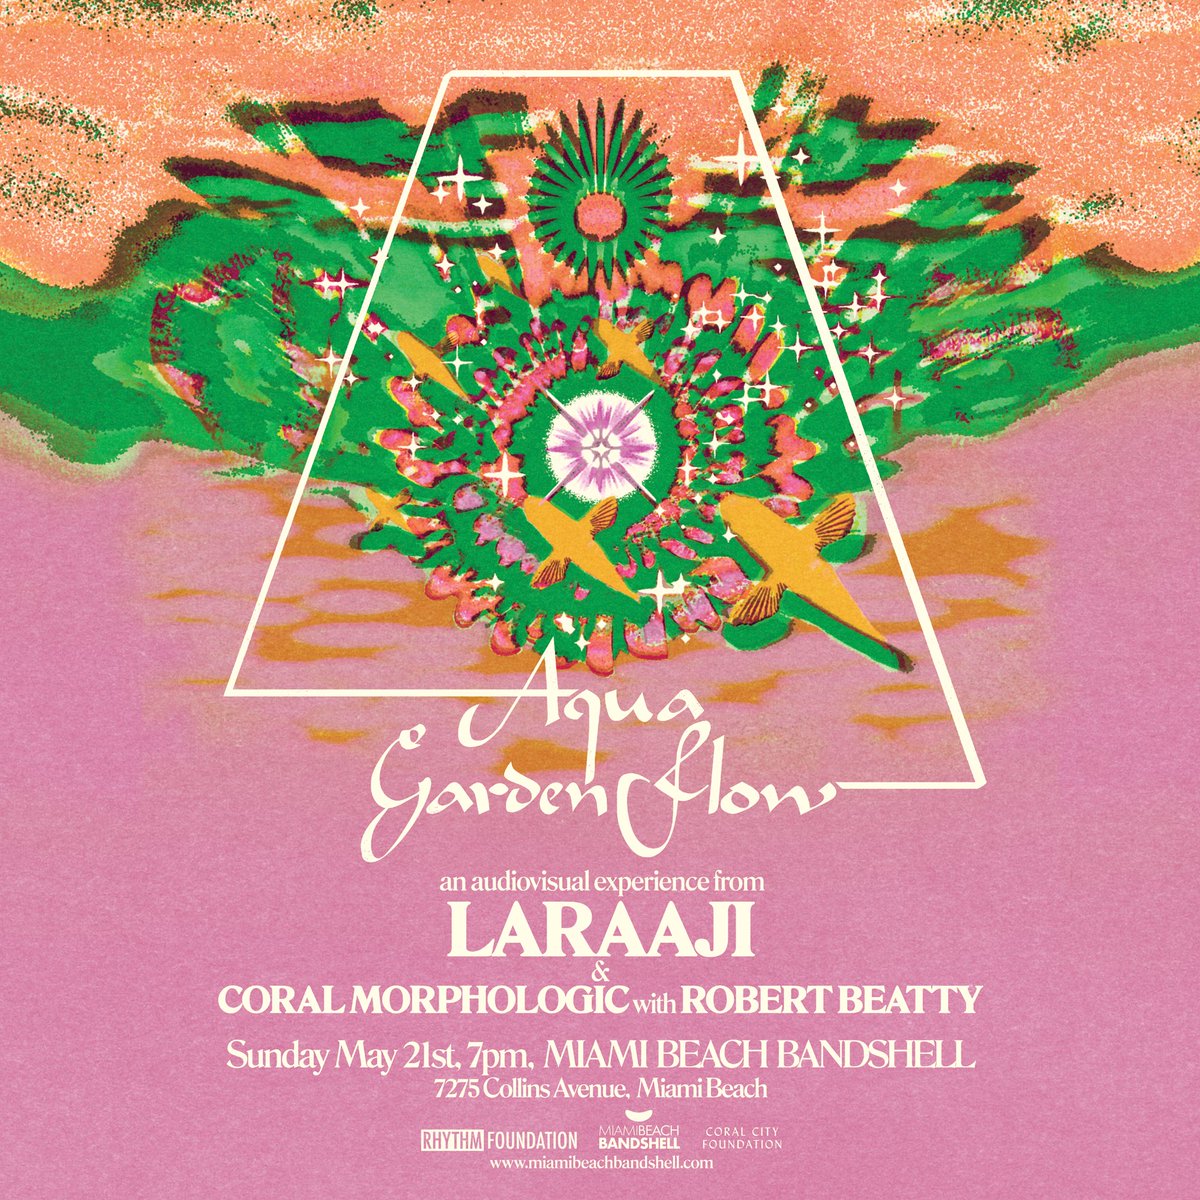 We and @Rhythm_Foundatn are proud to announce 'Aqua Garden Flow,' a special live audiovisual performance from legendary ambient musician Laraaji accompanied by Coral Morphologic films with animations by Robert Beatty (@EdSunspot), on Sunday, May 21st, 2023 at the @MBBandShell